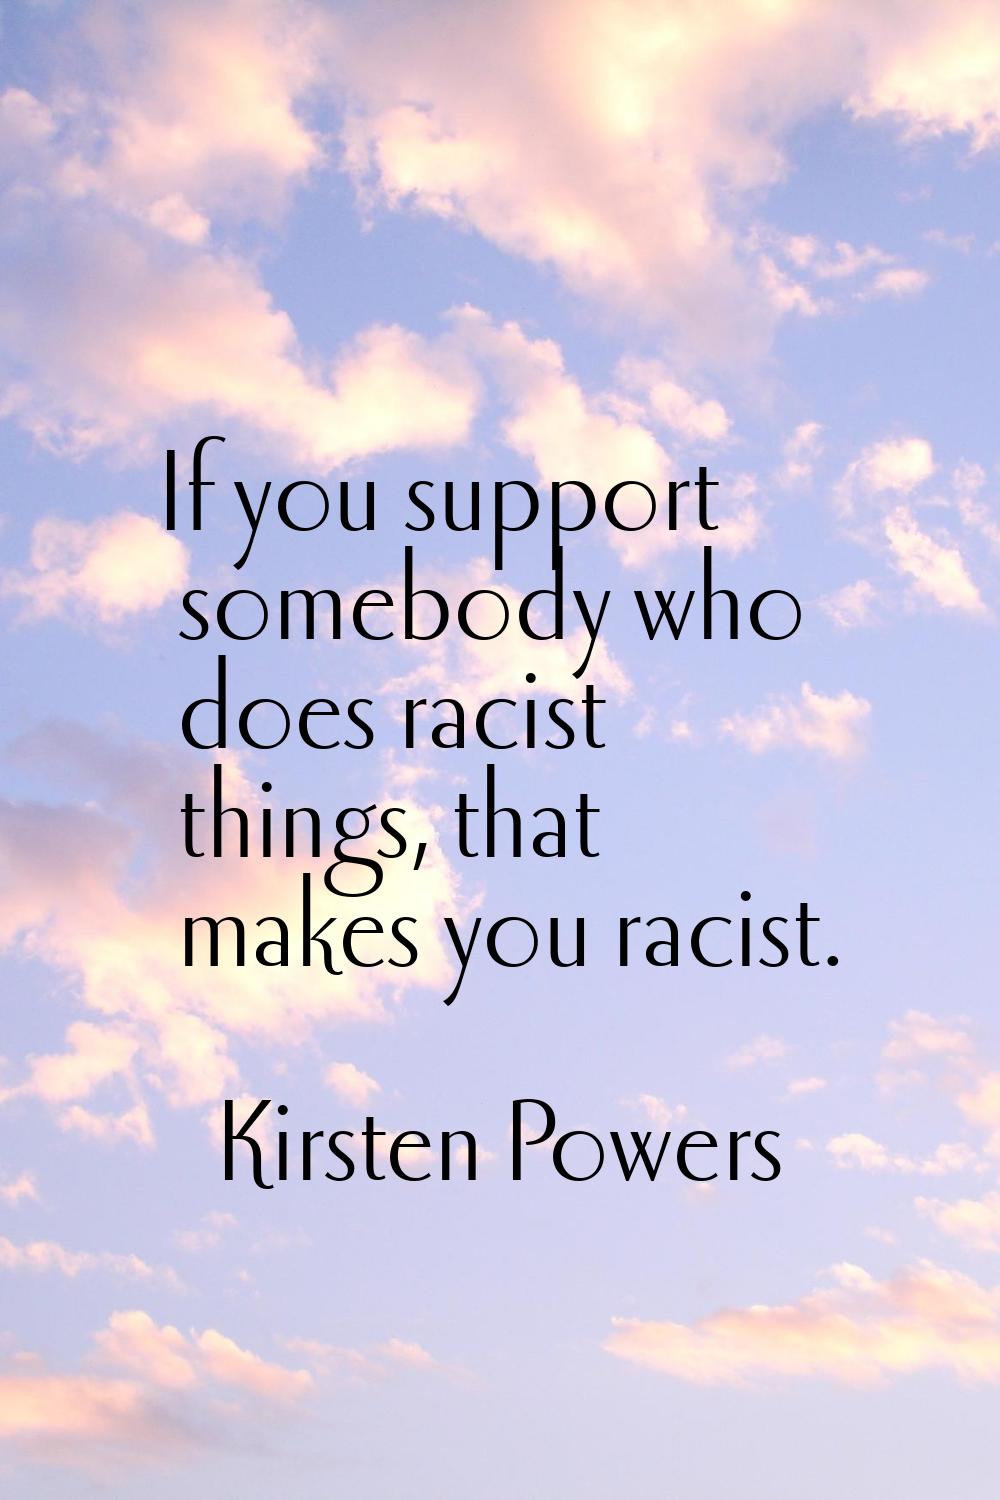 If you support somebody who does racist things, that makes you racist.